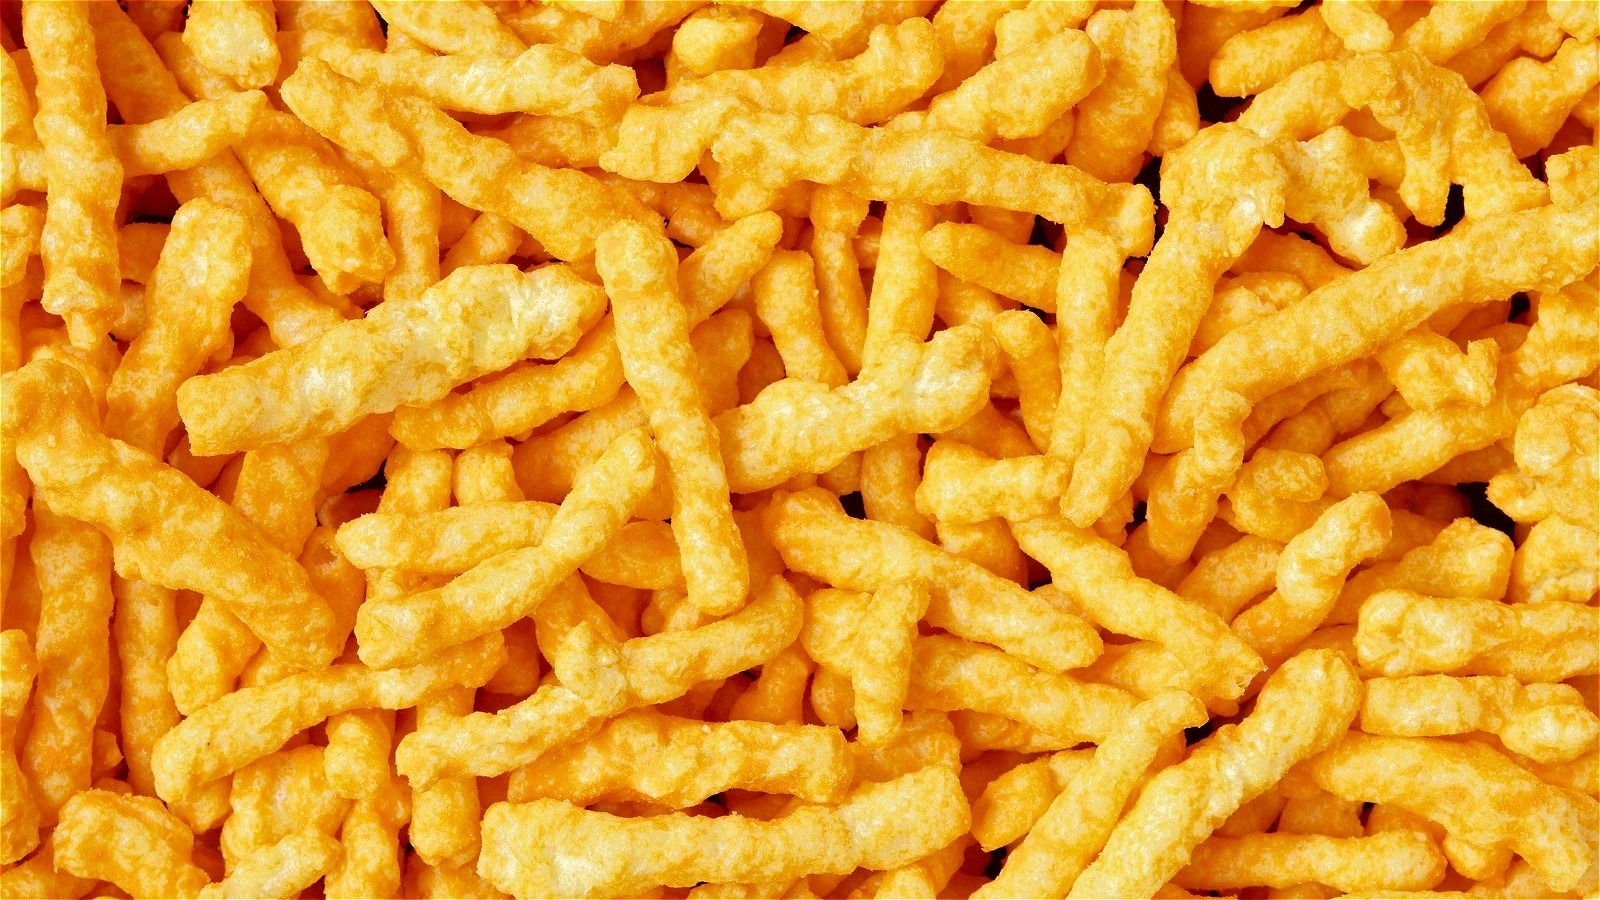 Cheetos Dusters Will Let You Sprinkle Cheetos Dust On Anything